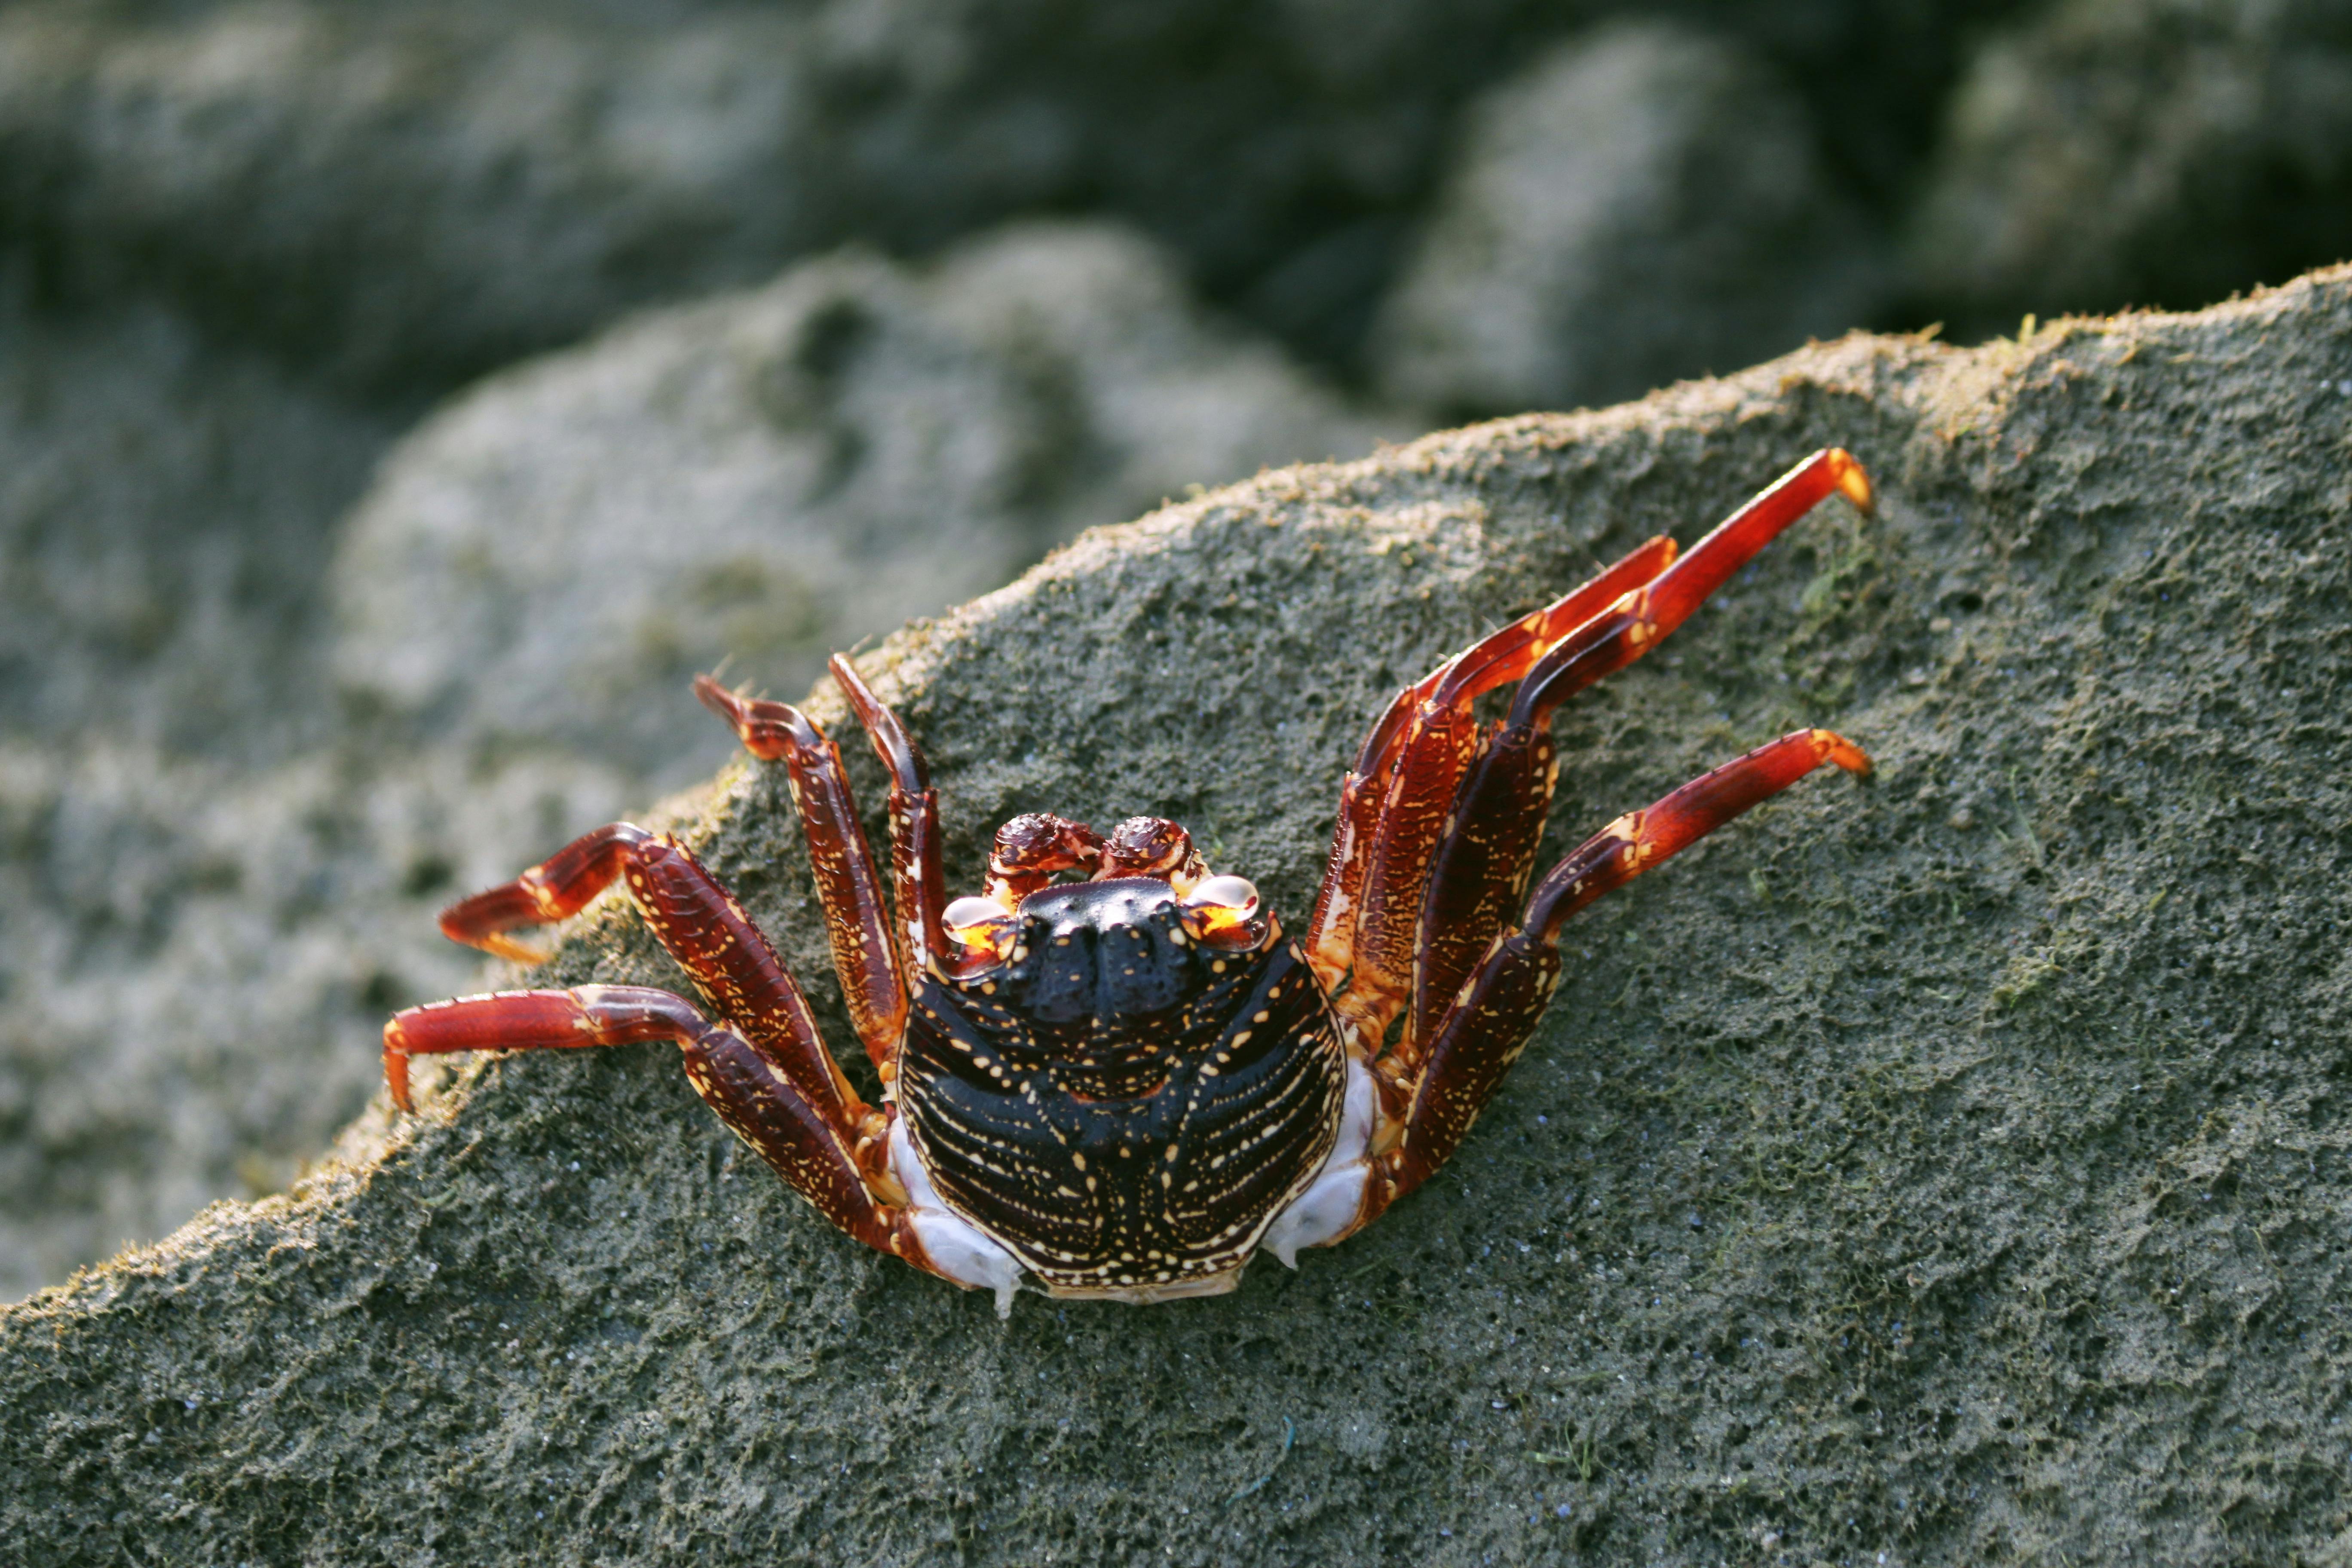 Fighter Crab Photos, Download The BEST Free Fighter Crab Stock Photos ...